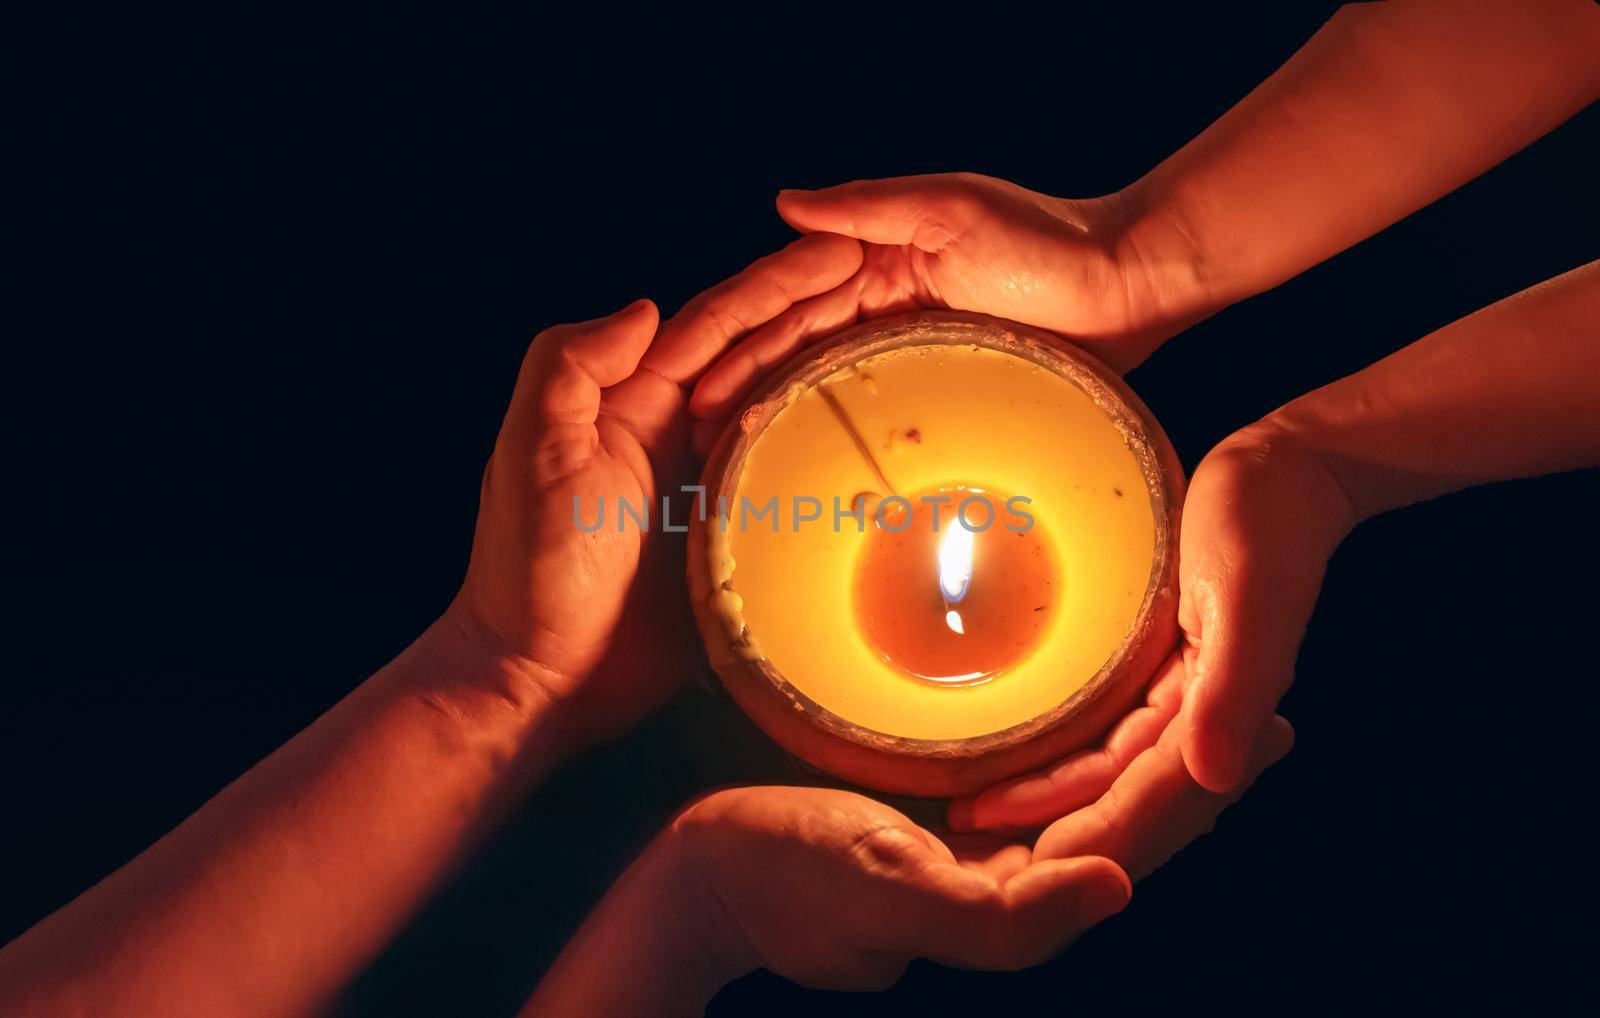 Candle in the hands blessing together